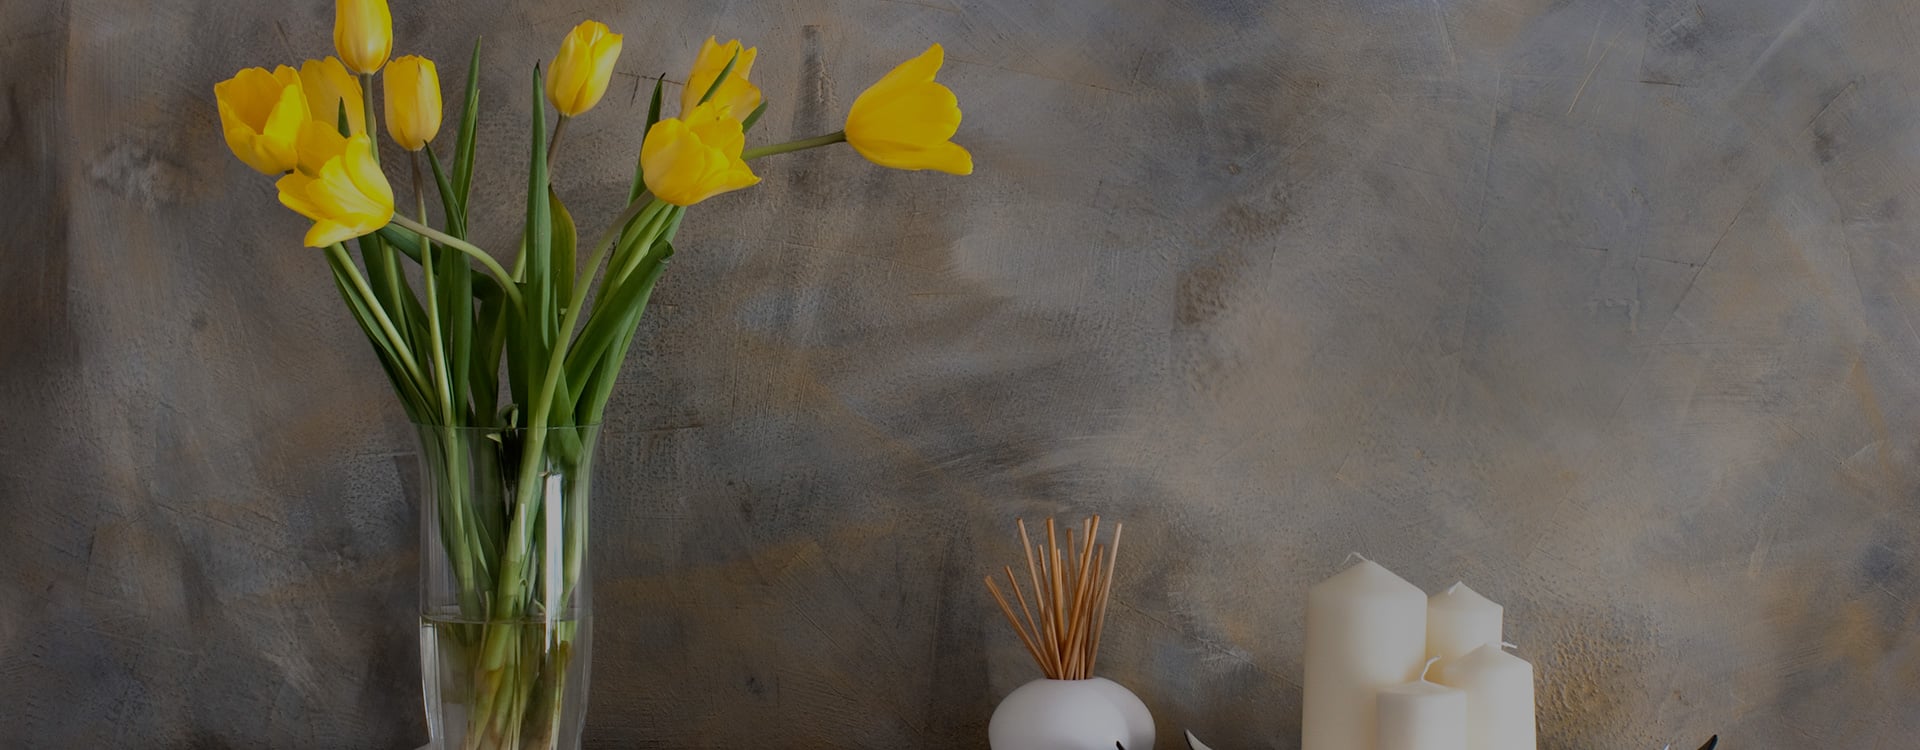 painting of vase with yellow flowers next to incense and candles